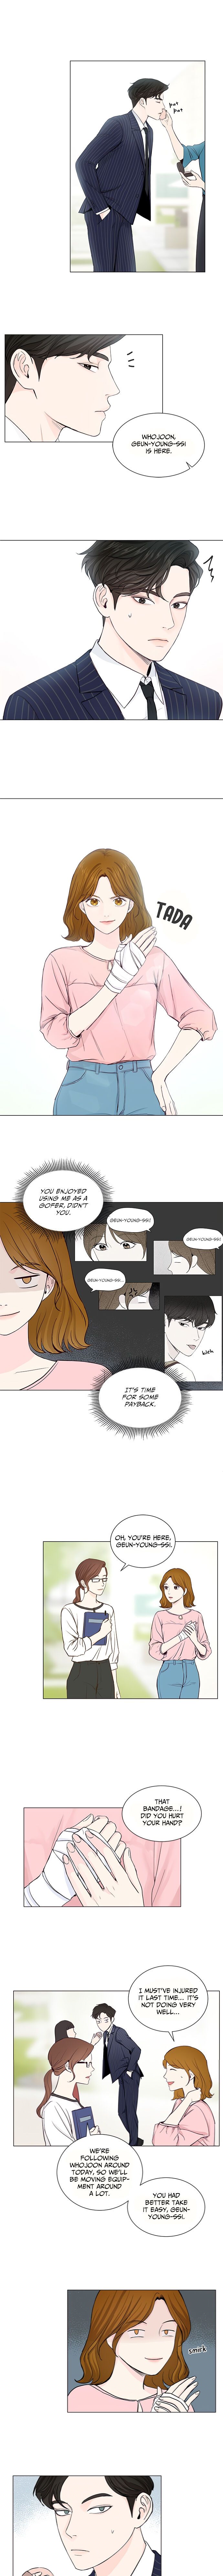 So I Married An Anti-Fan Chapter 032 page 2